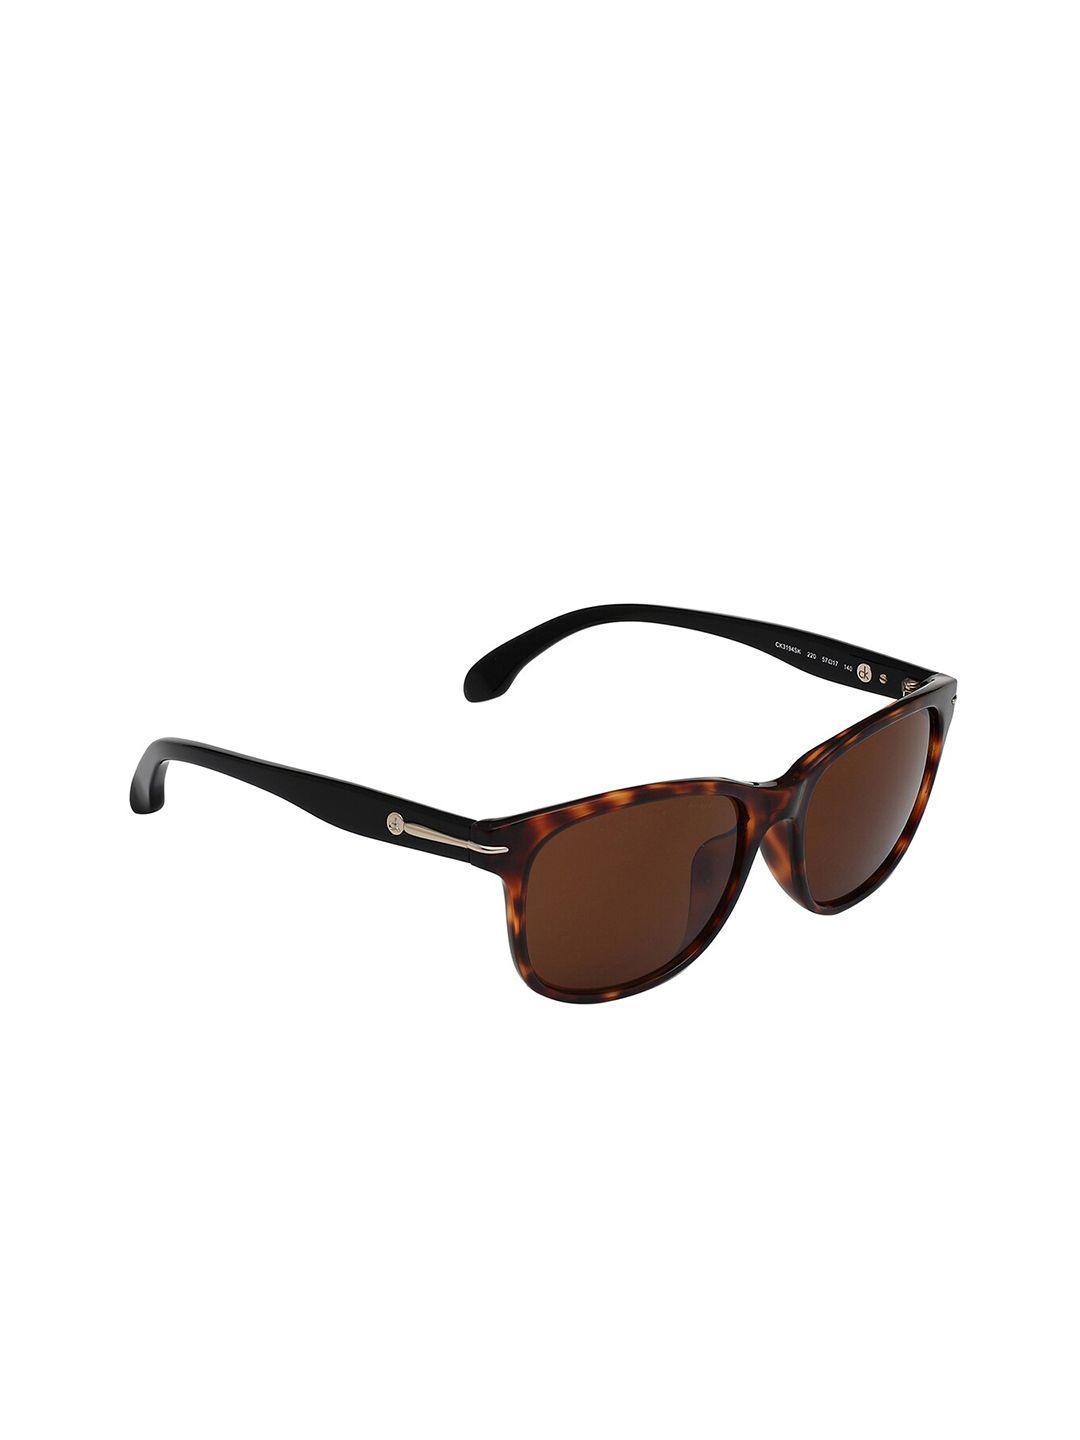 calvin klein unisex brown lens & brown square sunglasses with uv protected lens